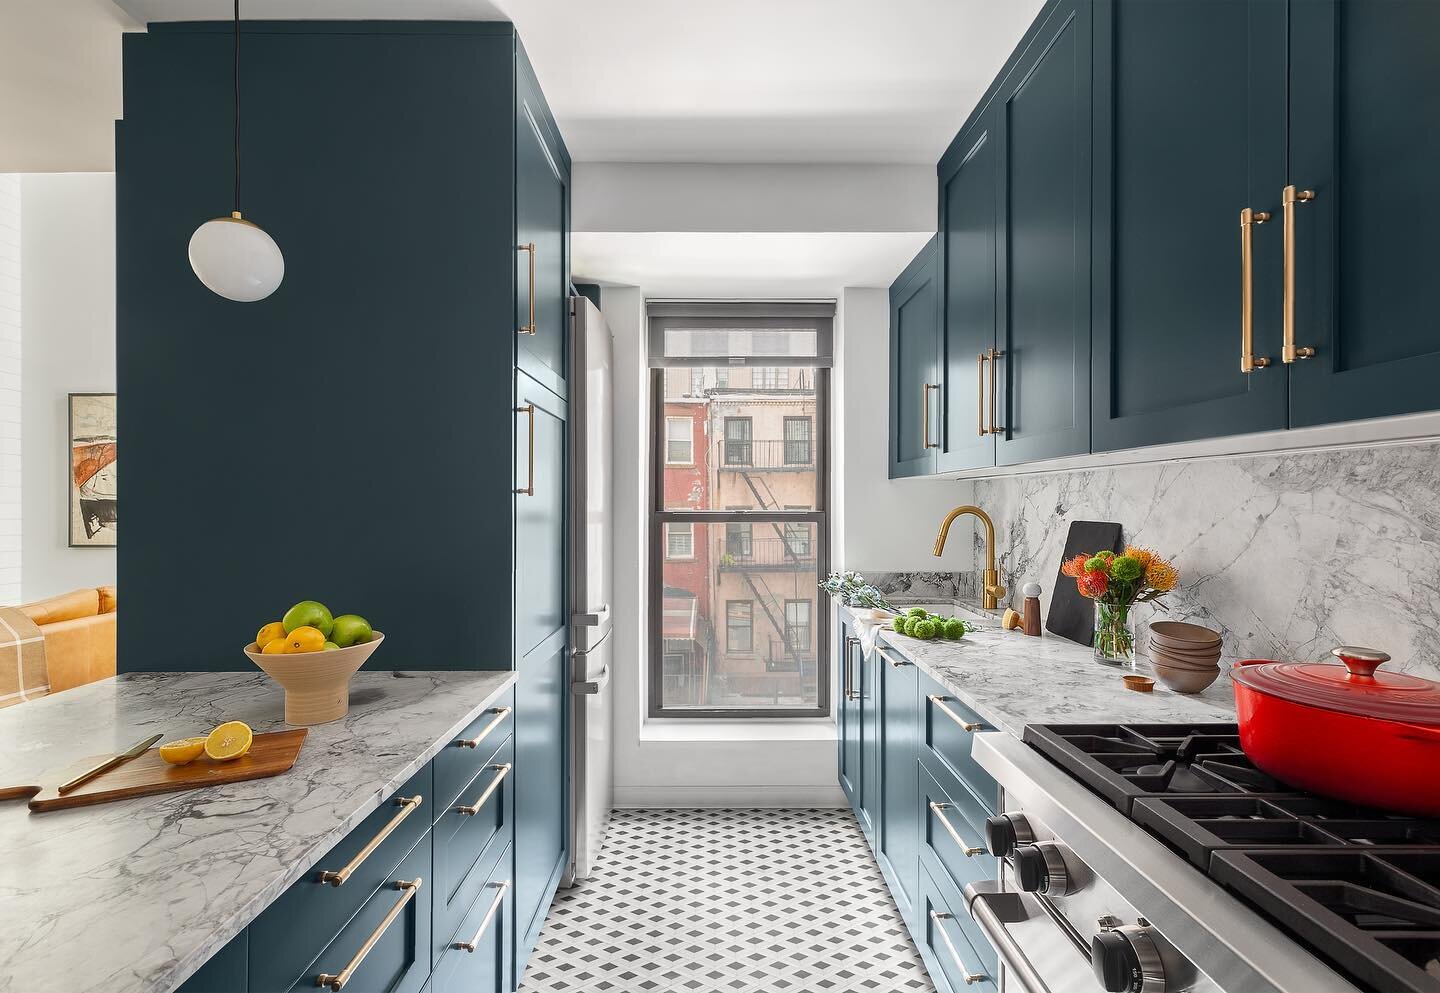 We will be forever crushing on this #chelseanyc #kitchenreno 

That&rsquo;s it for this Thursday!

Enjoy the view 😉 

Design @isabellapatrickinteriors 
Photography @shannondupre @dd_reps 

#kitchenstyle #kitchensofinsta #bluecabinets #kitchenfloor #